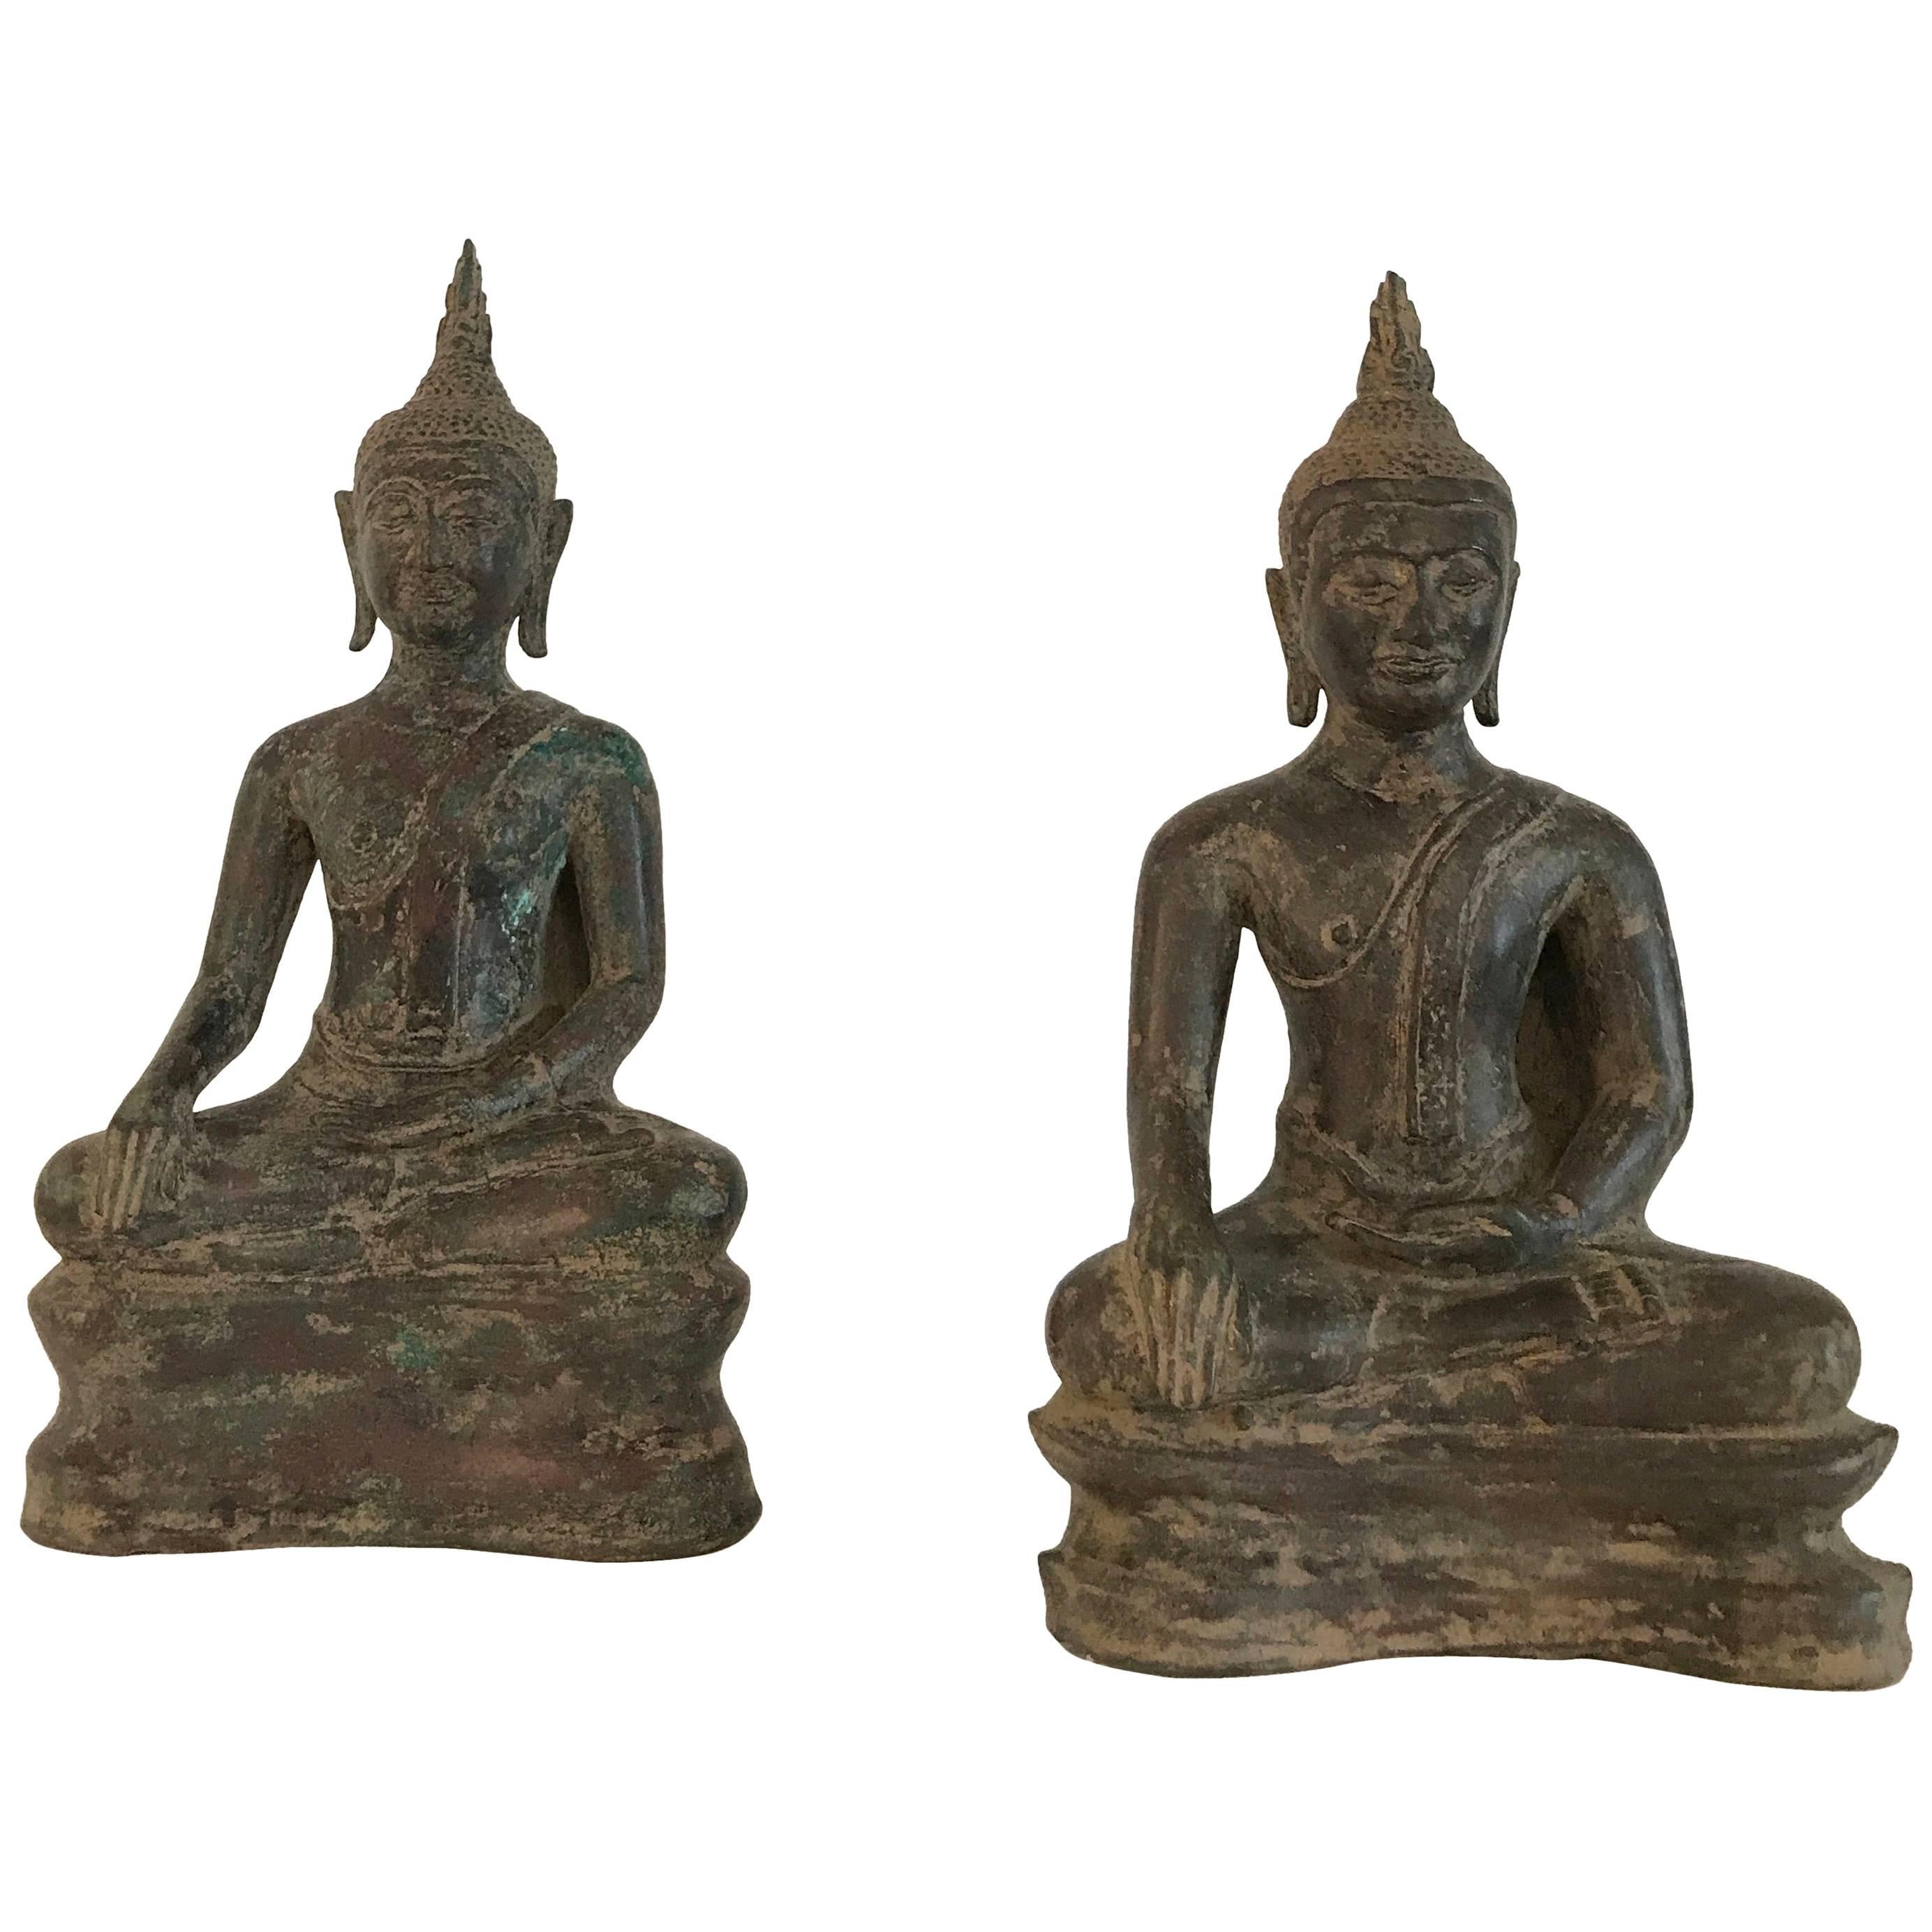 Very Exceptional Almost Identical Pair of Bronze Buddhas For Sale